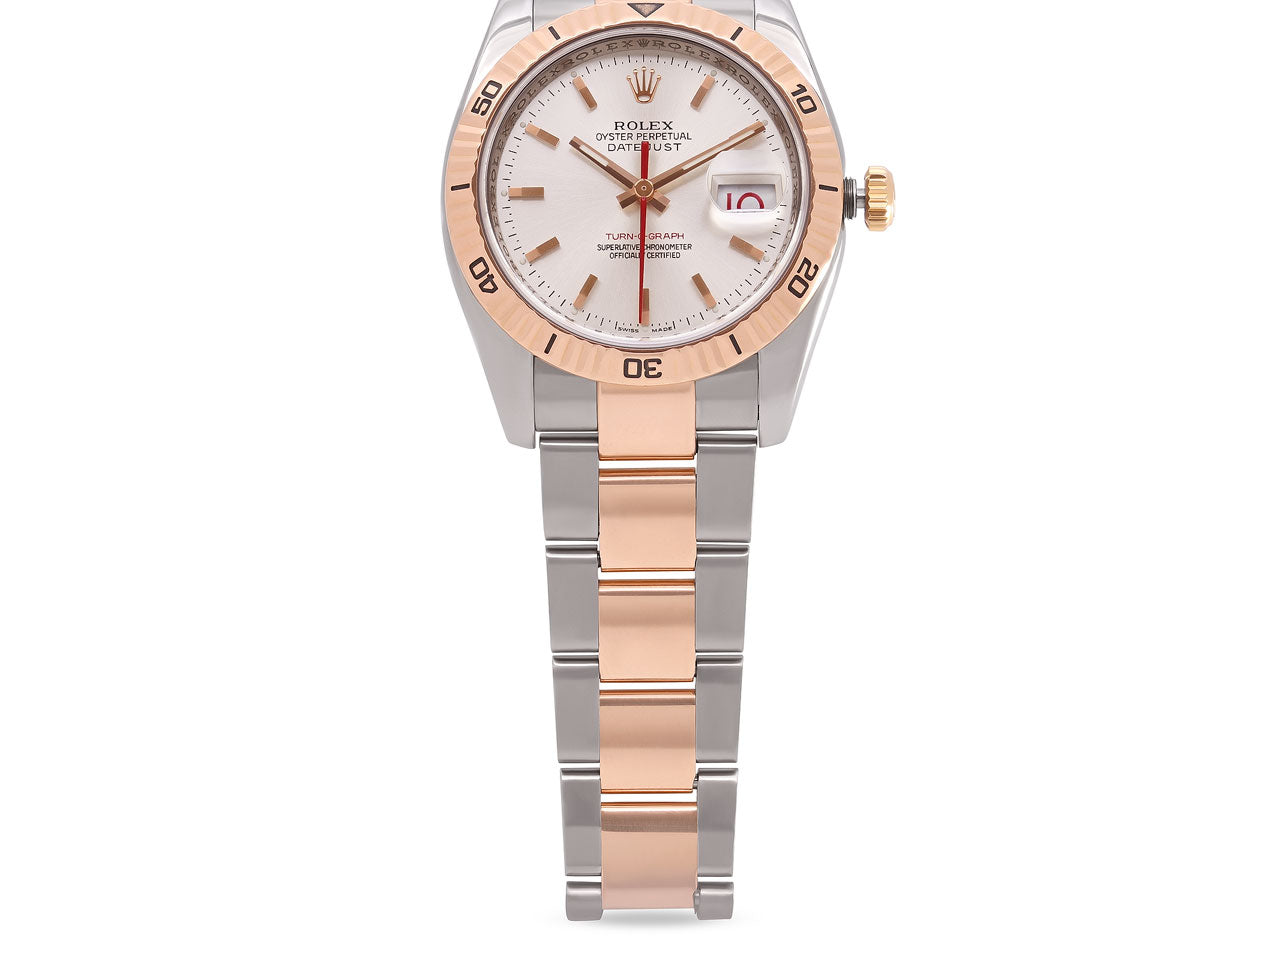 Rolex 'Turn-O-Graph' Datejust Watch in 18K Rose Gold and Stainless Steel, 36 mm